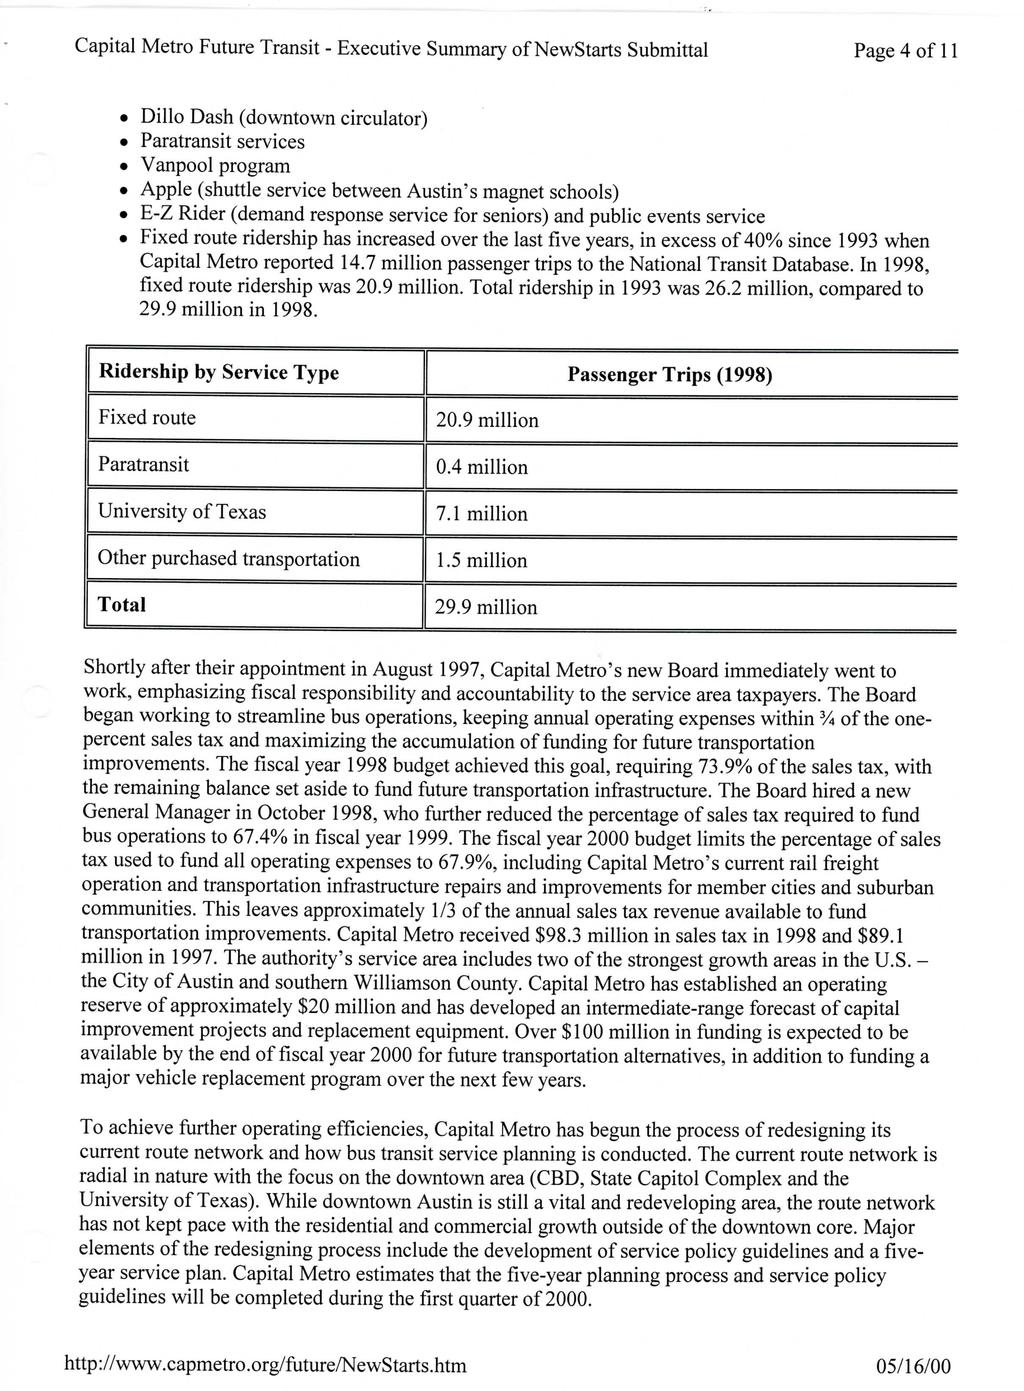 Capital Metro Future Transit - Executive Summary of NewStarts Submittal Page 4 of 11 Dillo Dash (downtown circulator) Paratransit services Vanpool program Apple (shuttle service between Austin's